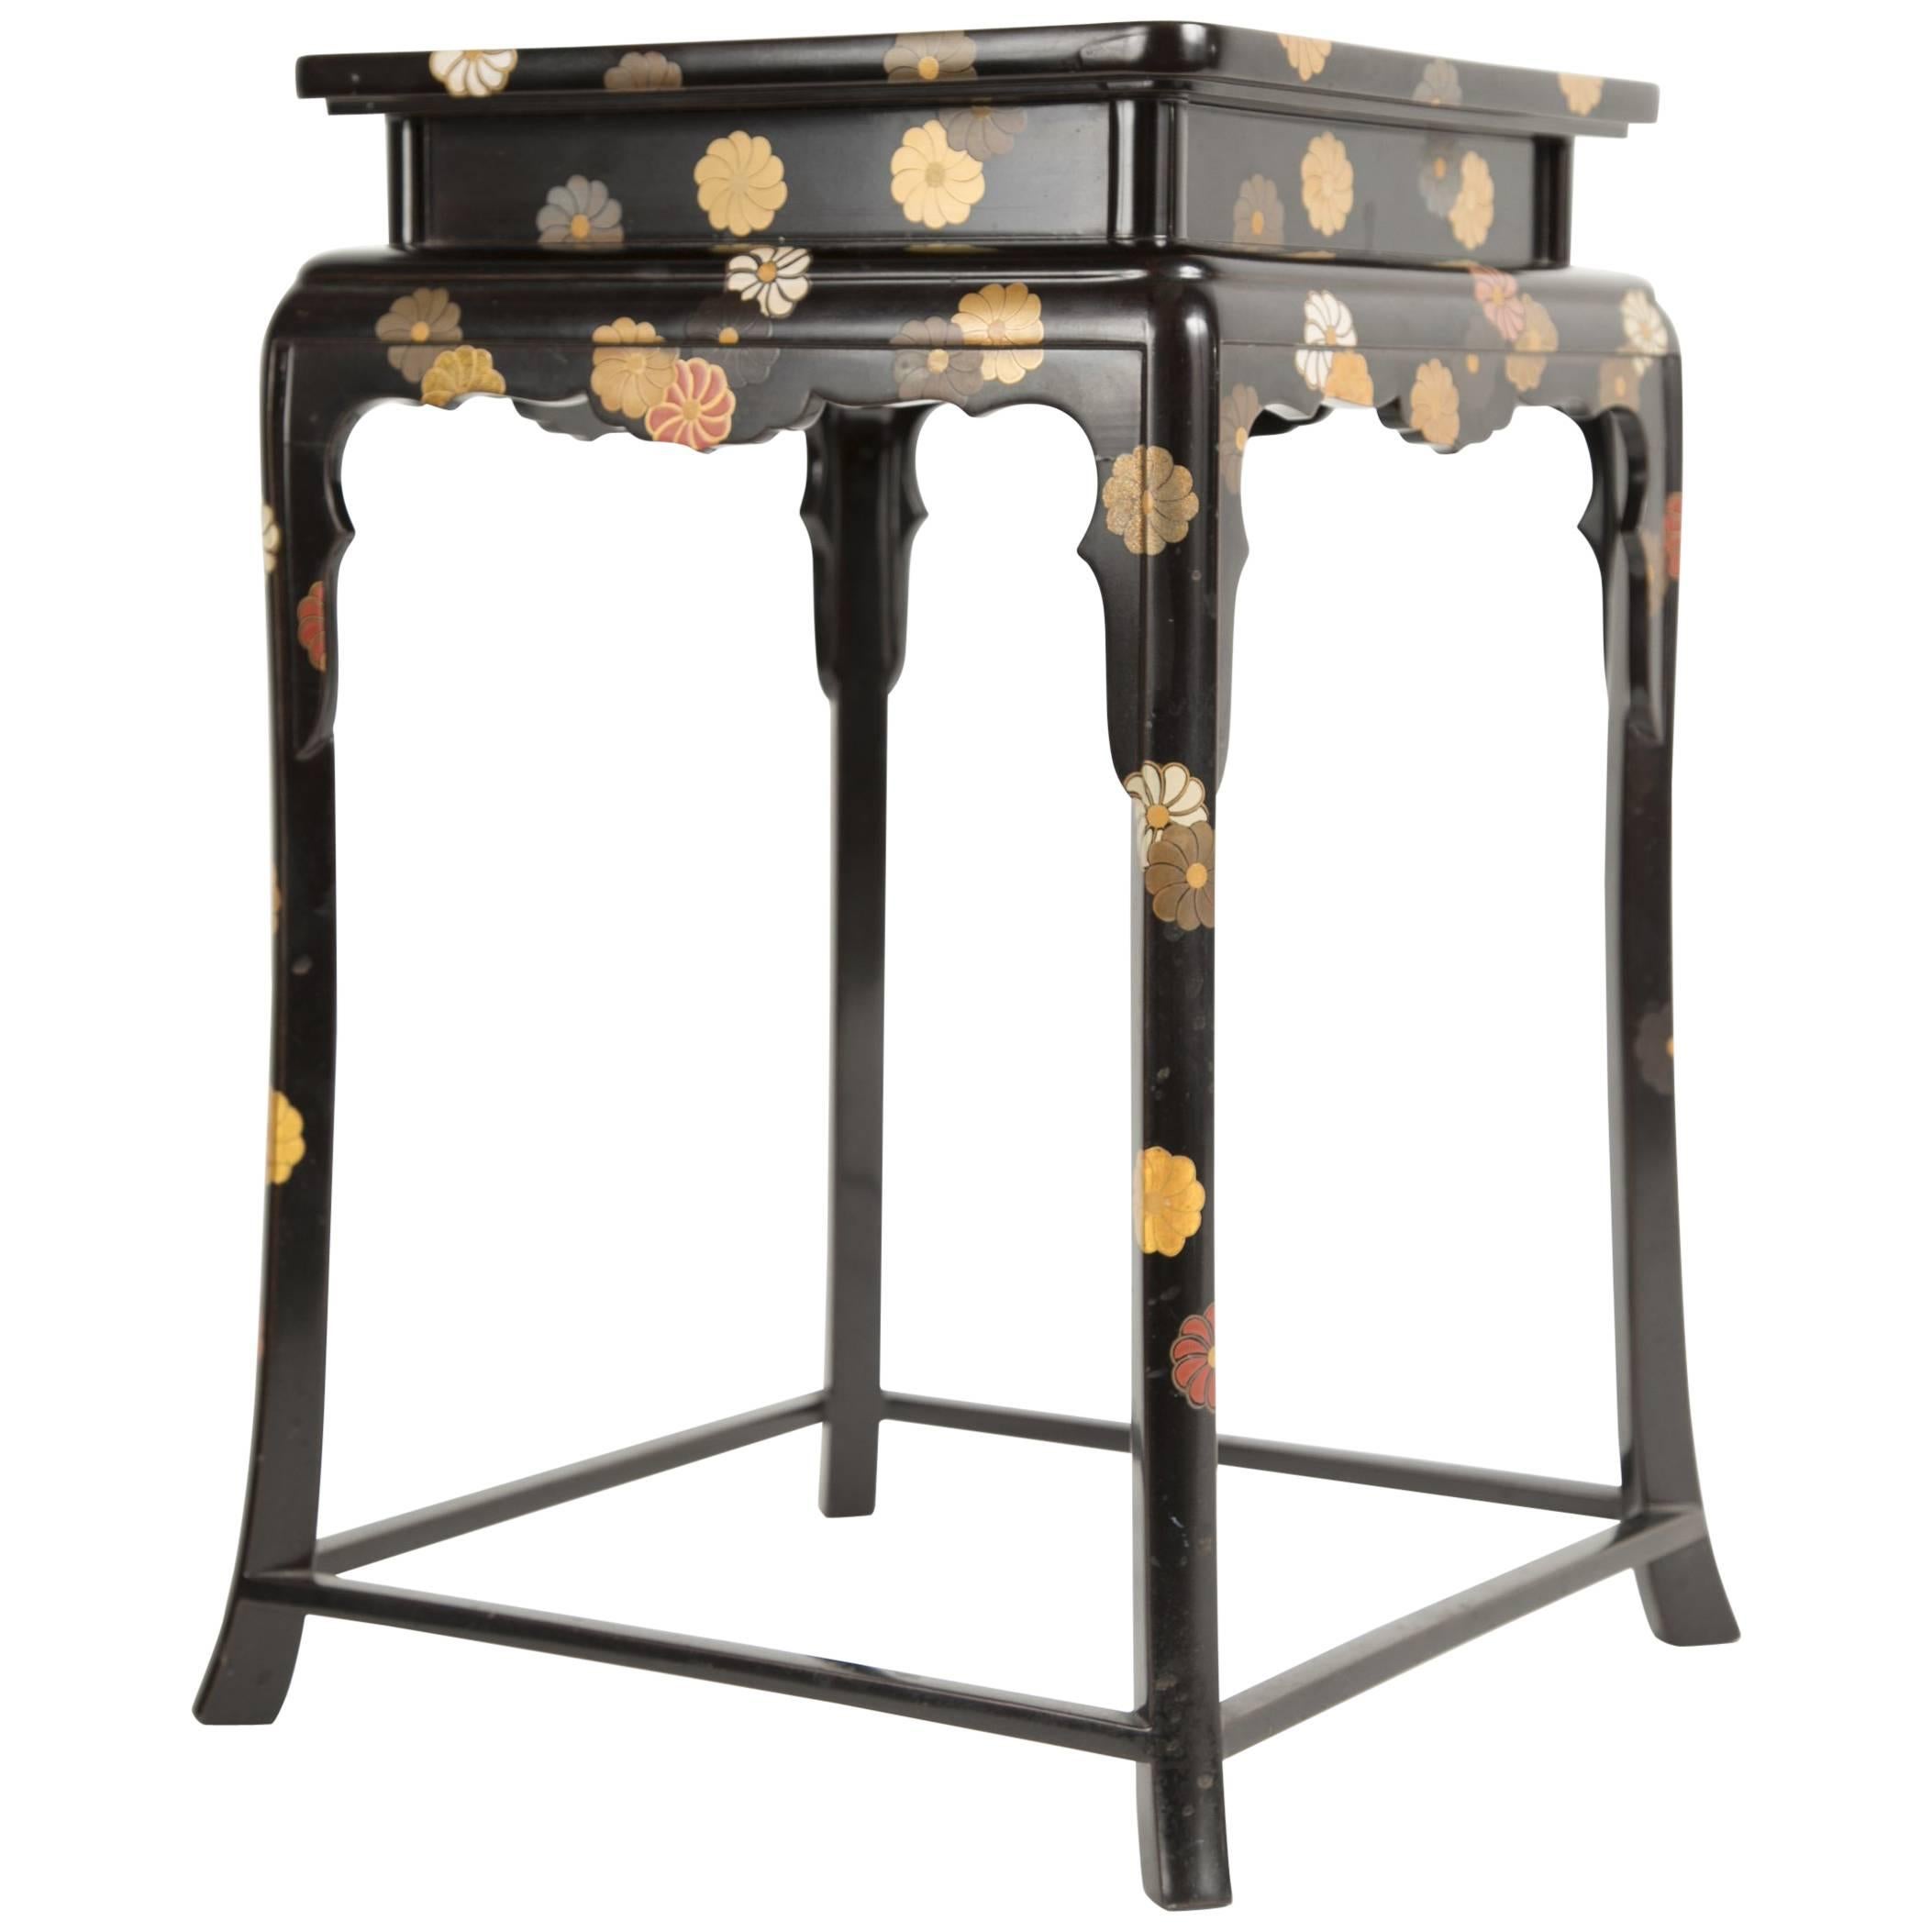 Japanese Black Lacquered Cocktail Table With Chrysanthemum Design